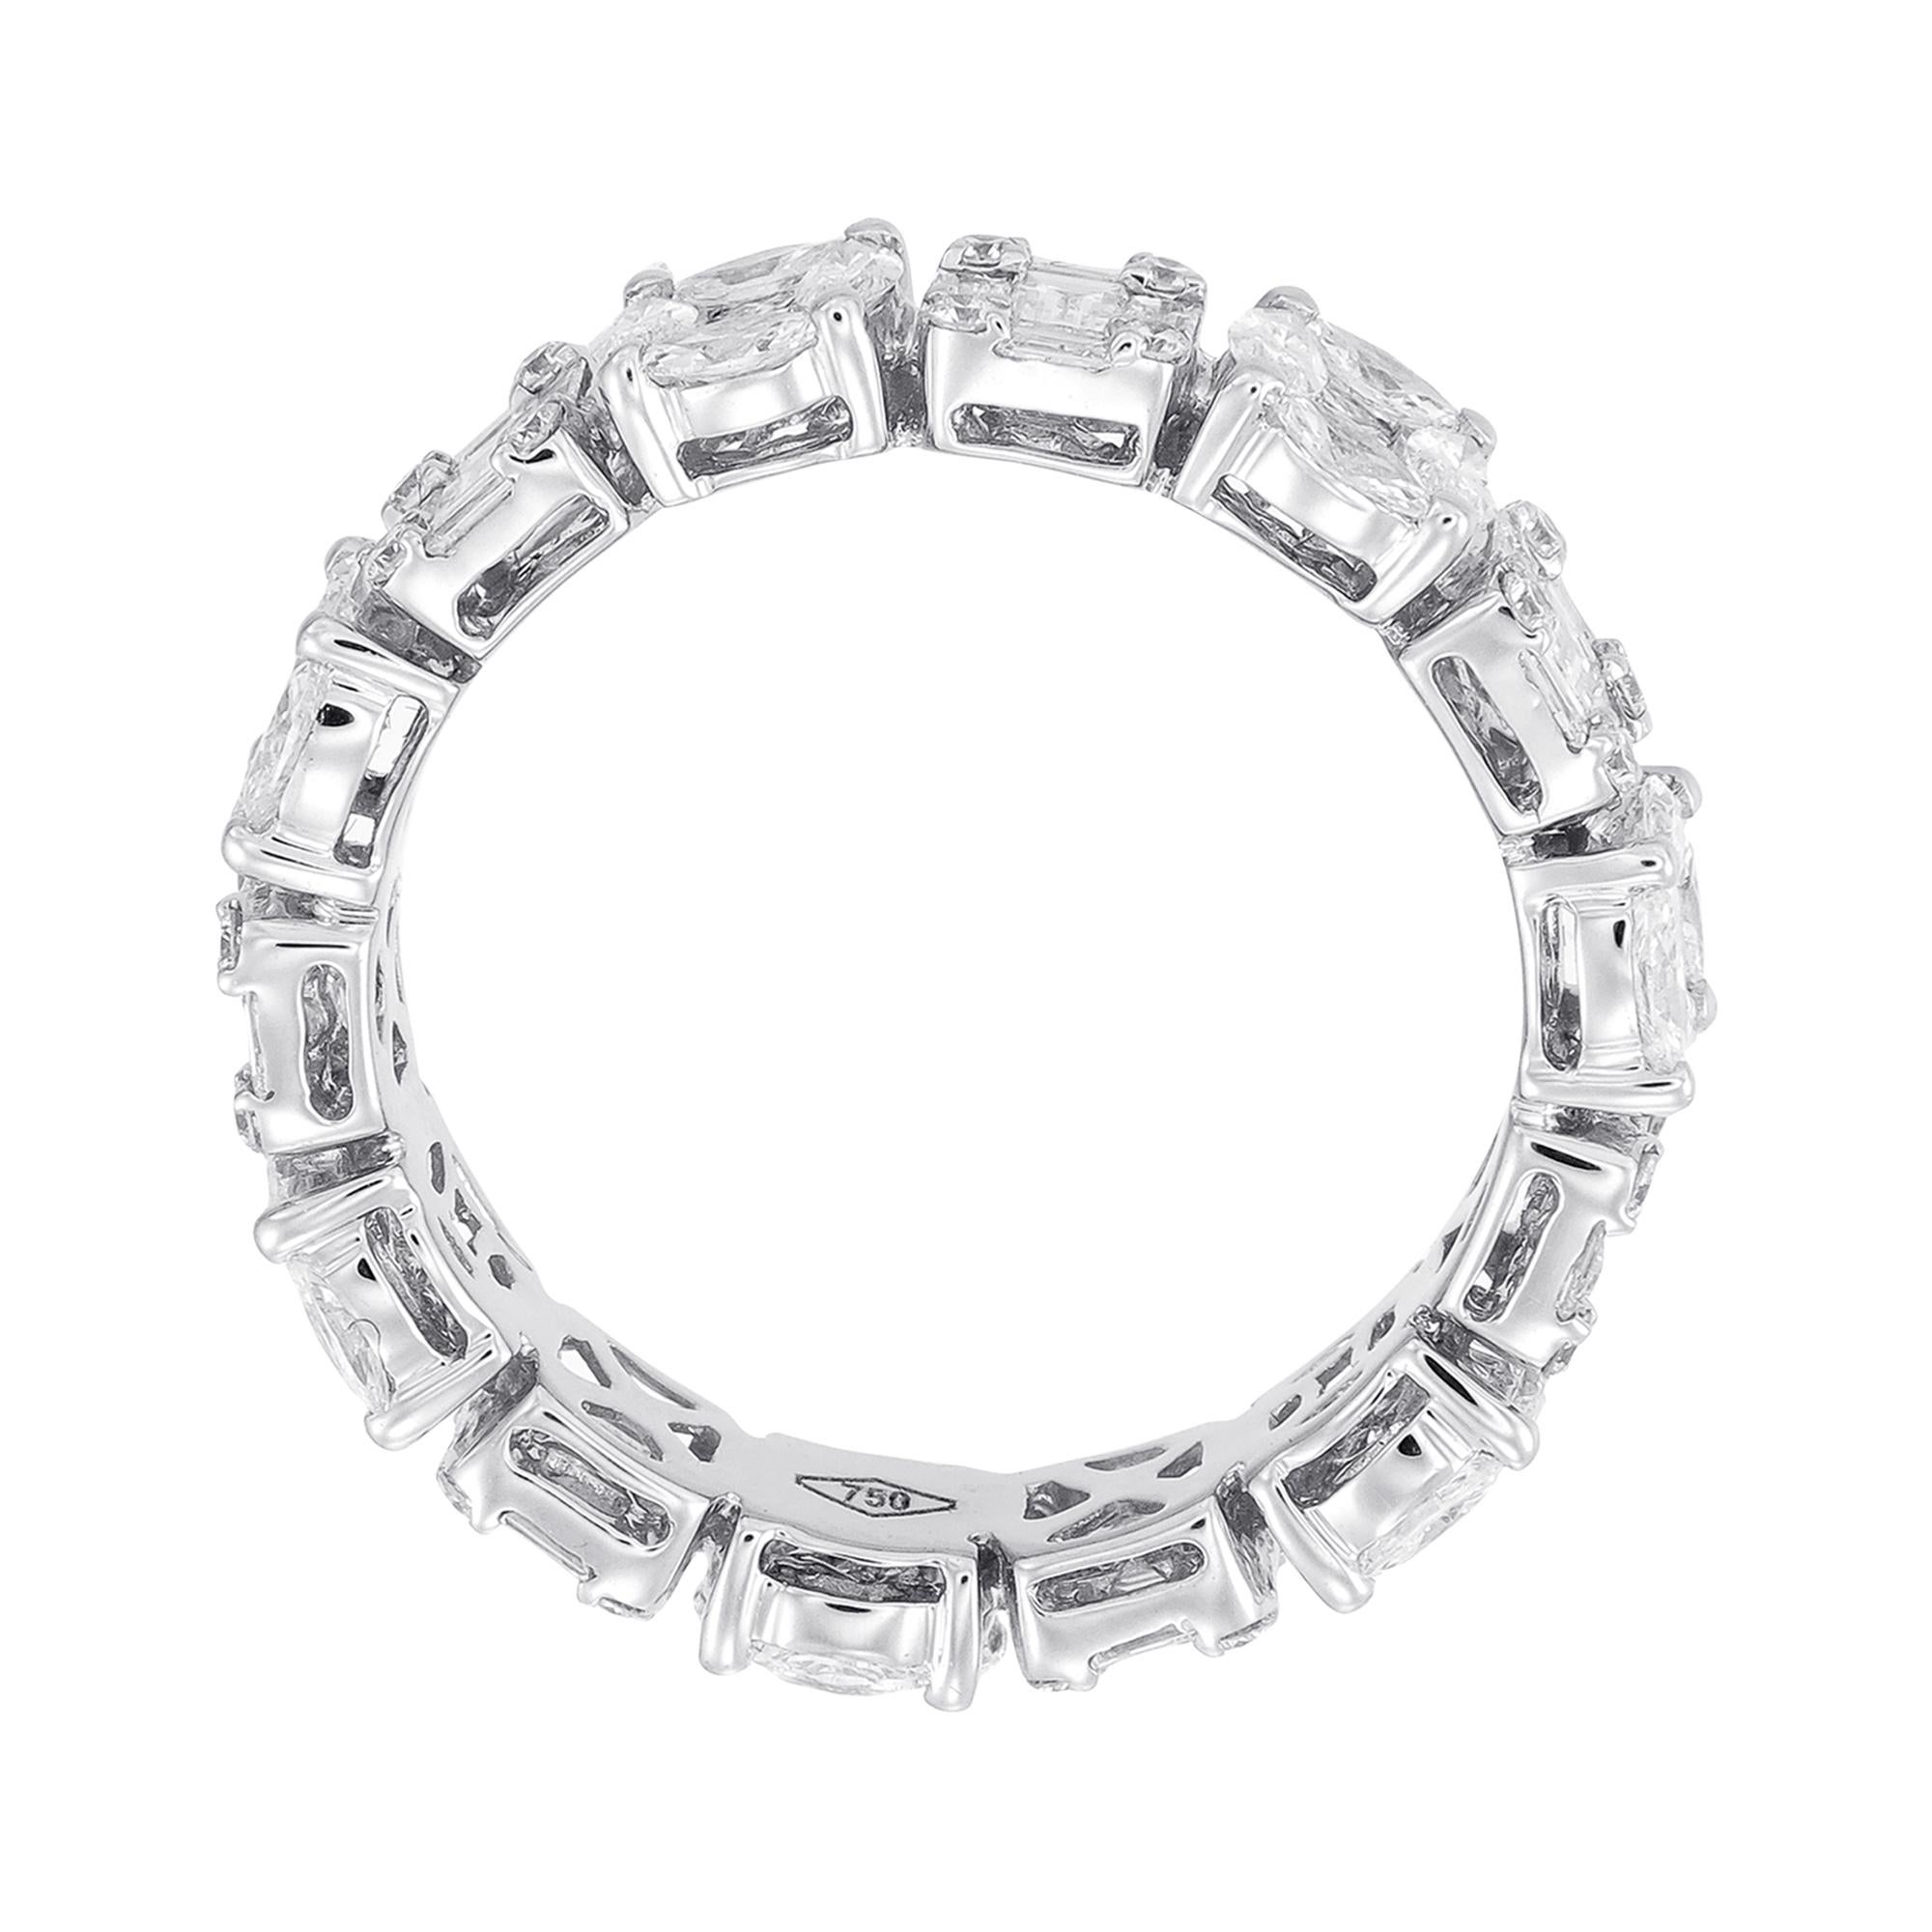 This exquisite and extremely unusual diamond eternity band is crafted in 18k white gold. It is a continuous circle of  Emerald & Oval cut diamond Illusion weighing band approx. 2.60 carats. It can be showcased as the perfect wedding ring, or diamond